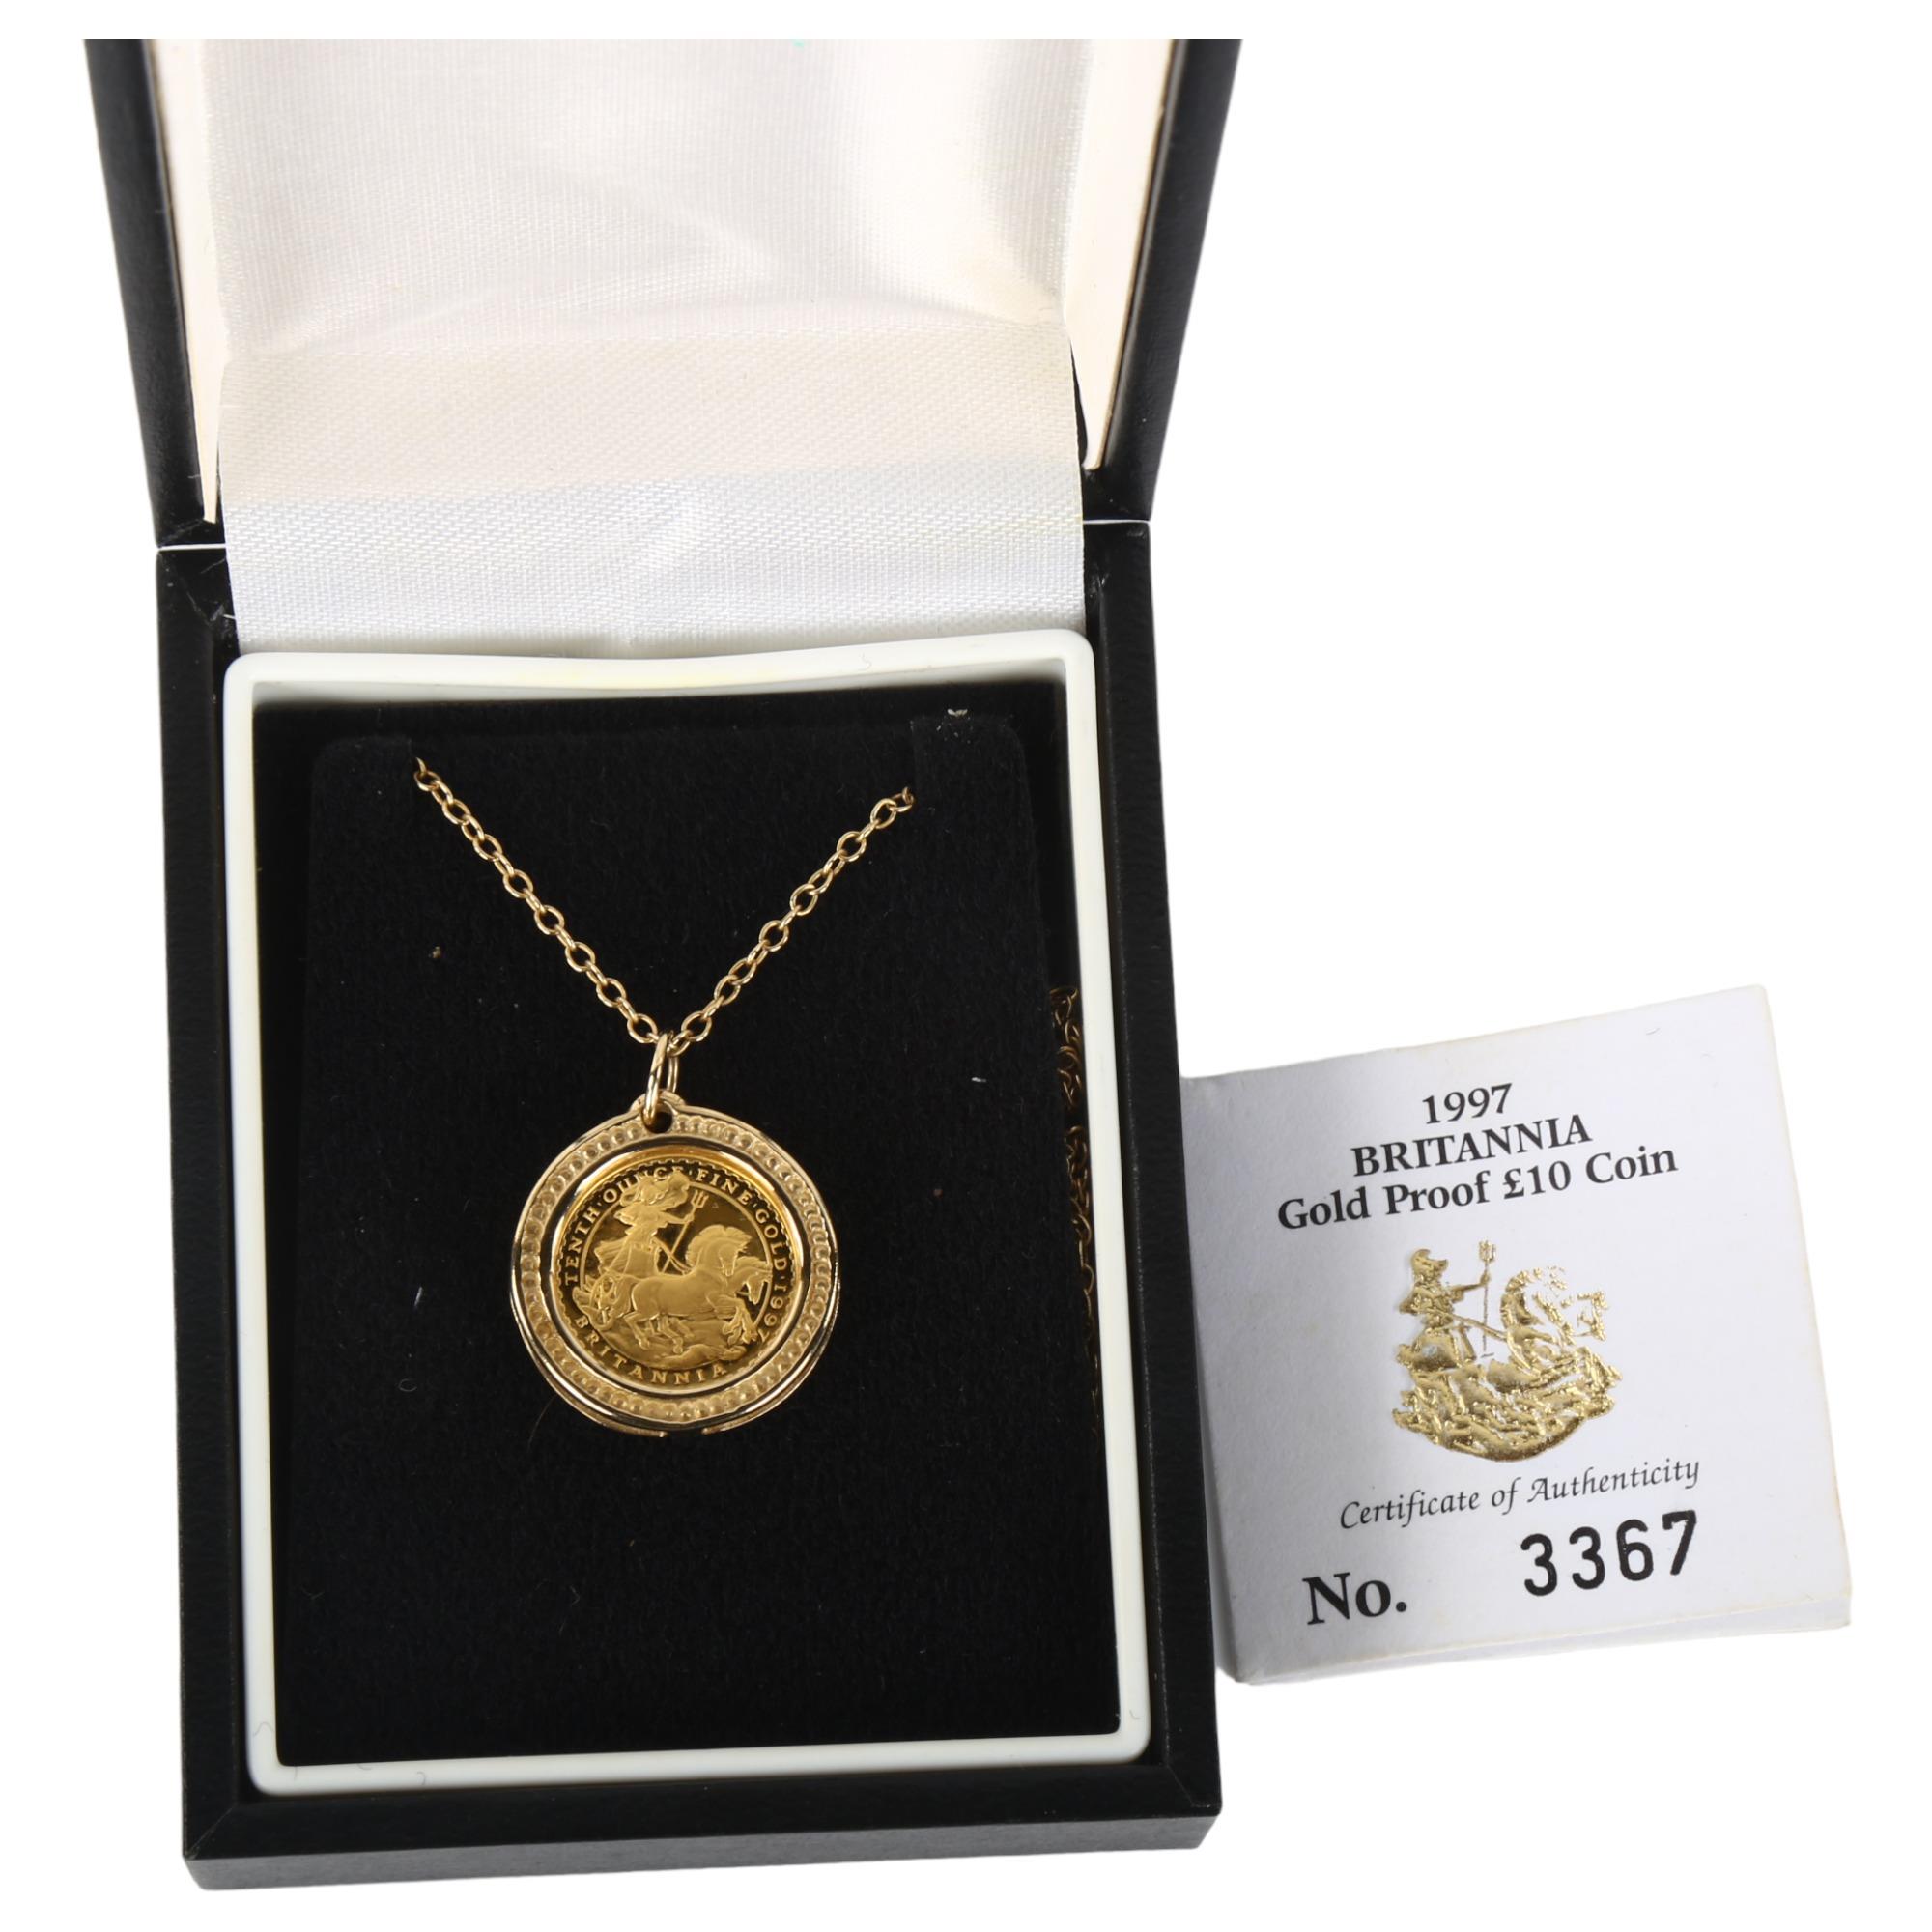 A 1997 Britannia gold proof £10 coin pendant necklace, chain length 44cm, 8.1g, limited edition